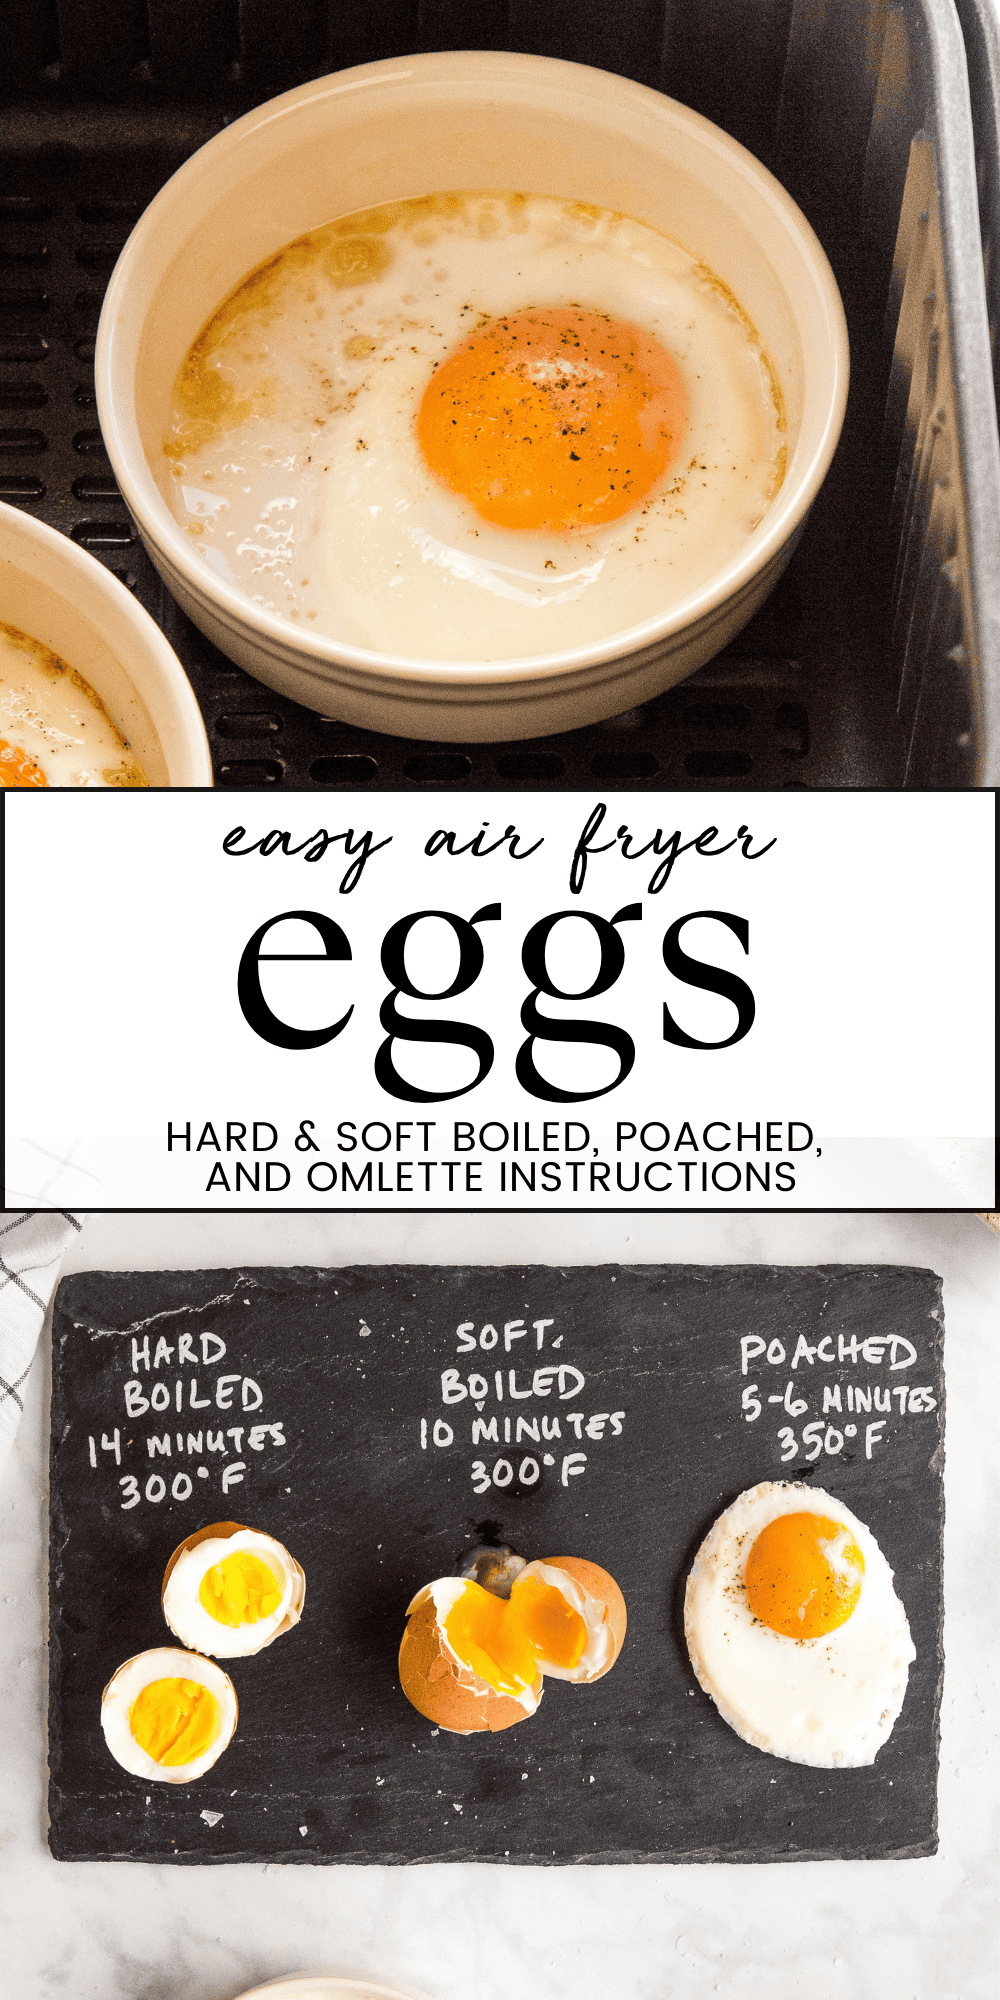 This Air Fryer Eggs recipe is the best tutorial for cooking quick and easy eggs! Air Fryer hard boiled eggs, soft boiled eggs, poached eggs, and omelettes - follow our guide for the perfect eggs, every single time. Recipe from thebusybaker.ca! #airfryereggs #airfryerhardboiledeggs #airfryersoftboiledeggs #airfryerbreakfast #airfryerrecipe #eggsrecipe #eggsforbreakfast #airfryertutorial #airfryerpoachedeggs #airfryeromelette via @busybakerblog